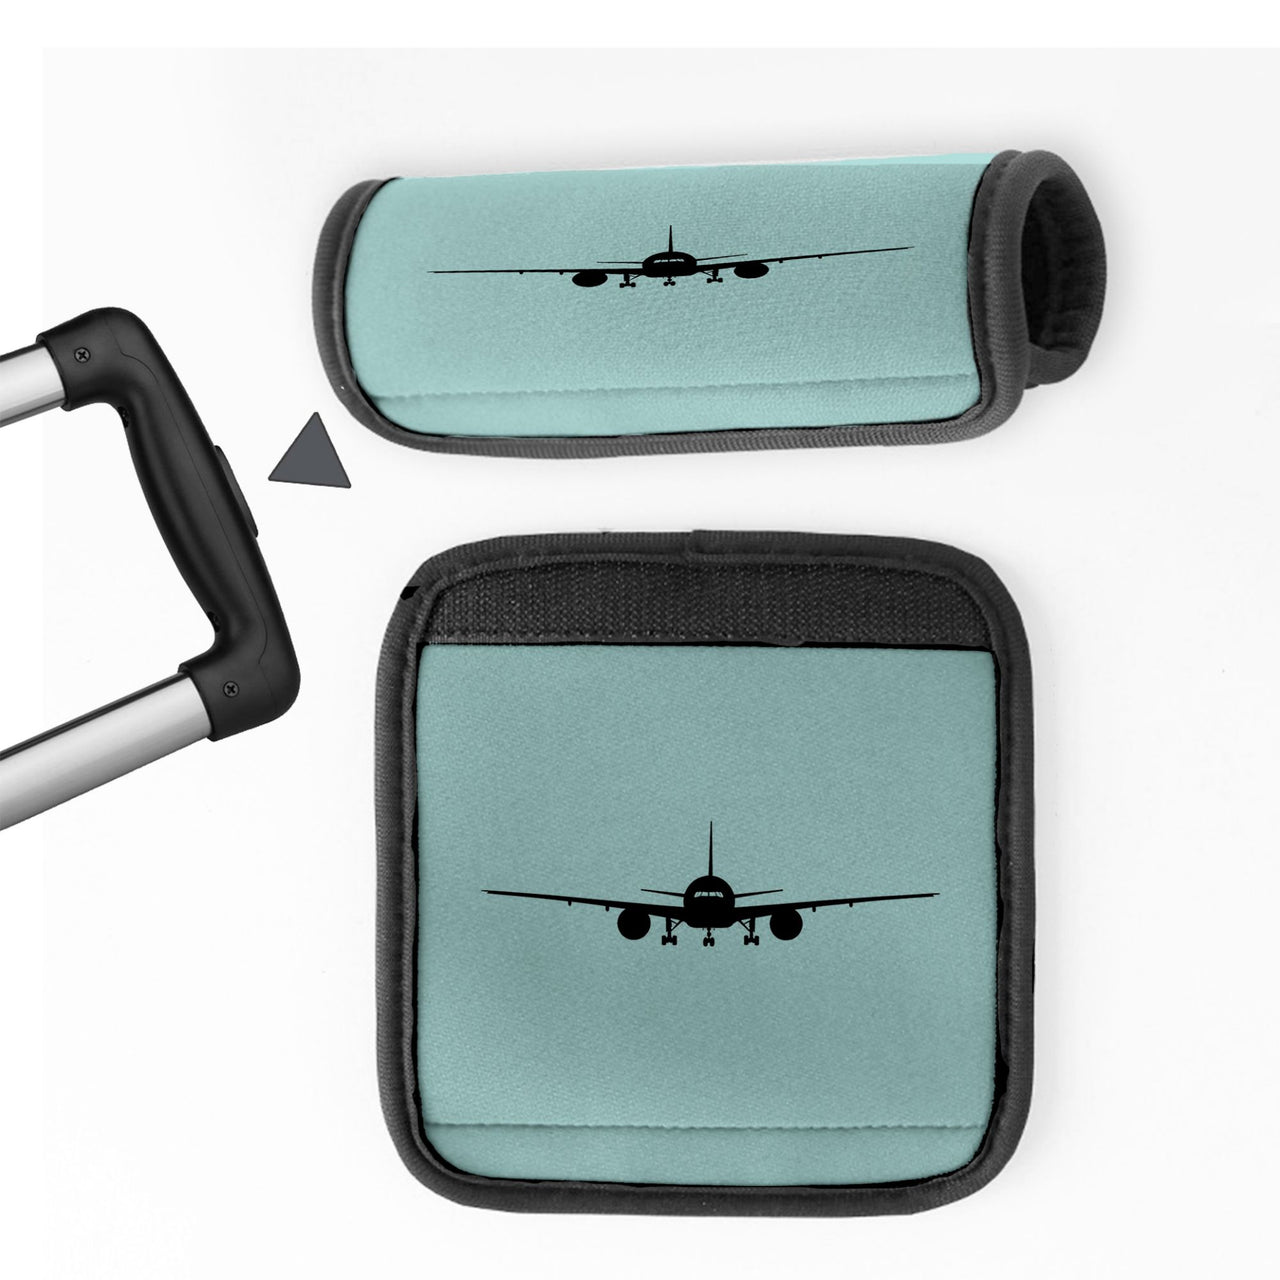 Boeing 777 Silhouette Designed Neoprene Luggage Handle Covers